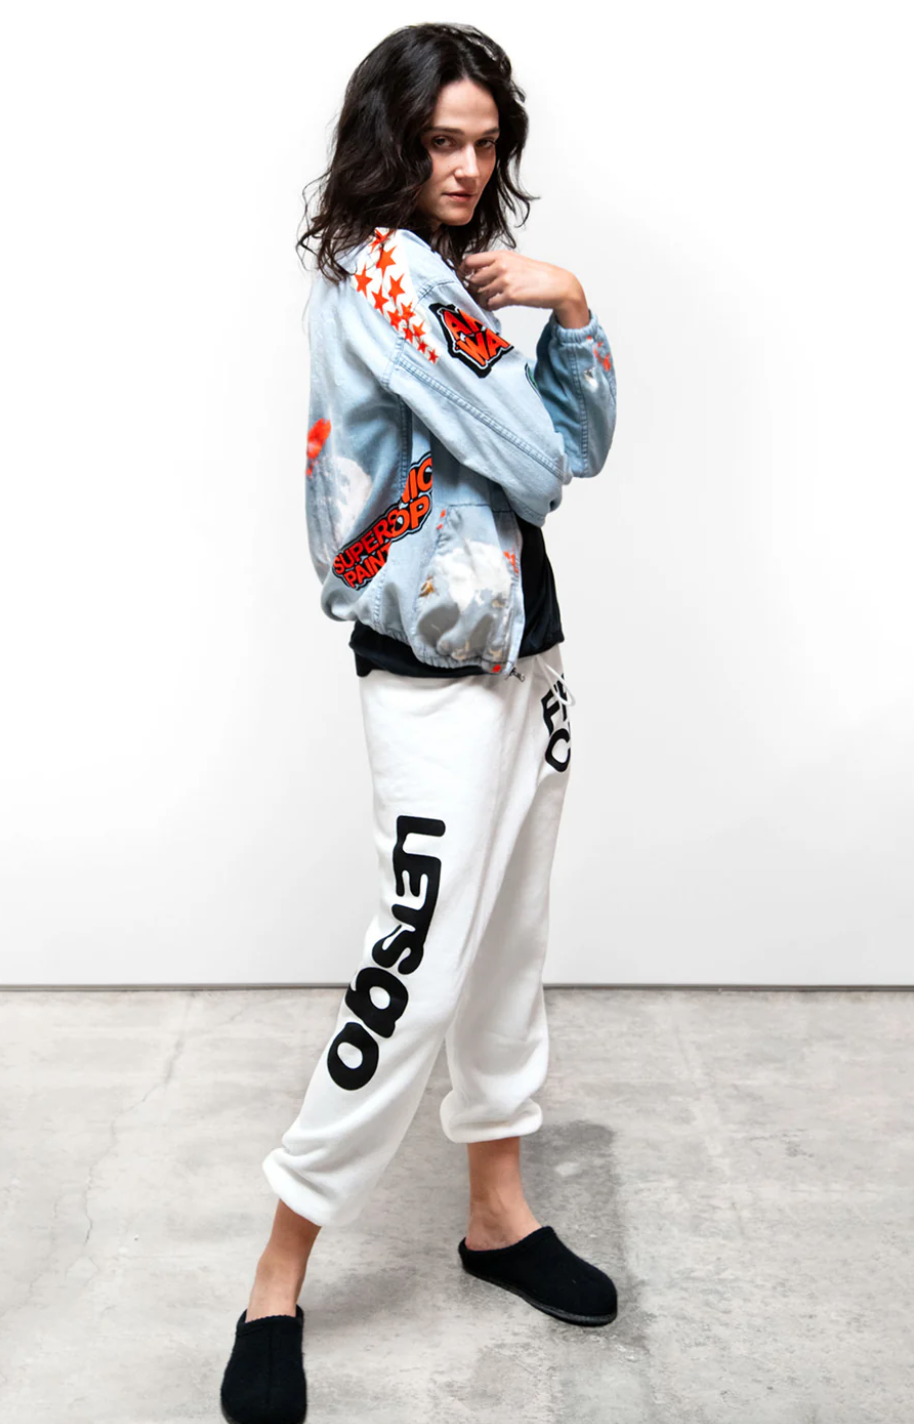 A woman stands confidently wearing a stylish white and red graphic jacket over a T-shirt, paired with the CIRCA&#39;99 OG LETSGO OLDSCHOOL POLYBLEND/FLUFF sweat sweatpants marked &quot;LET&#39;S GO&quot; in black letters, and black slip-on shoes, against a plain background.